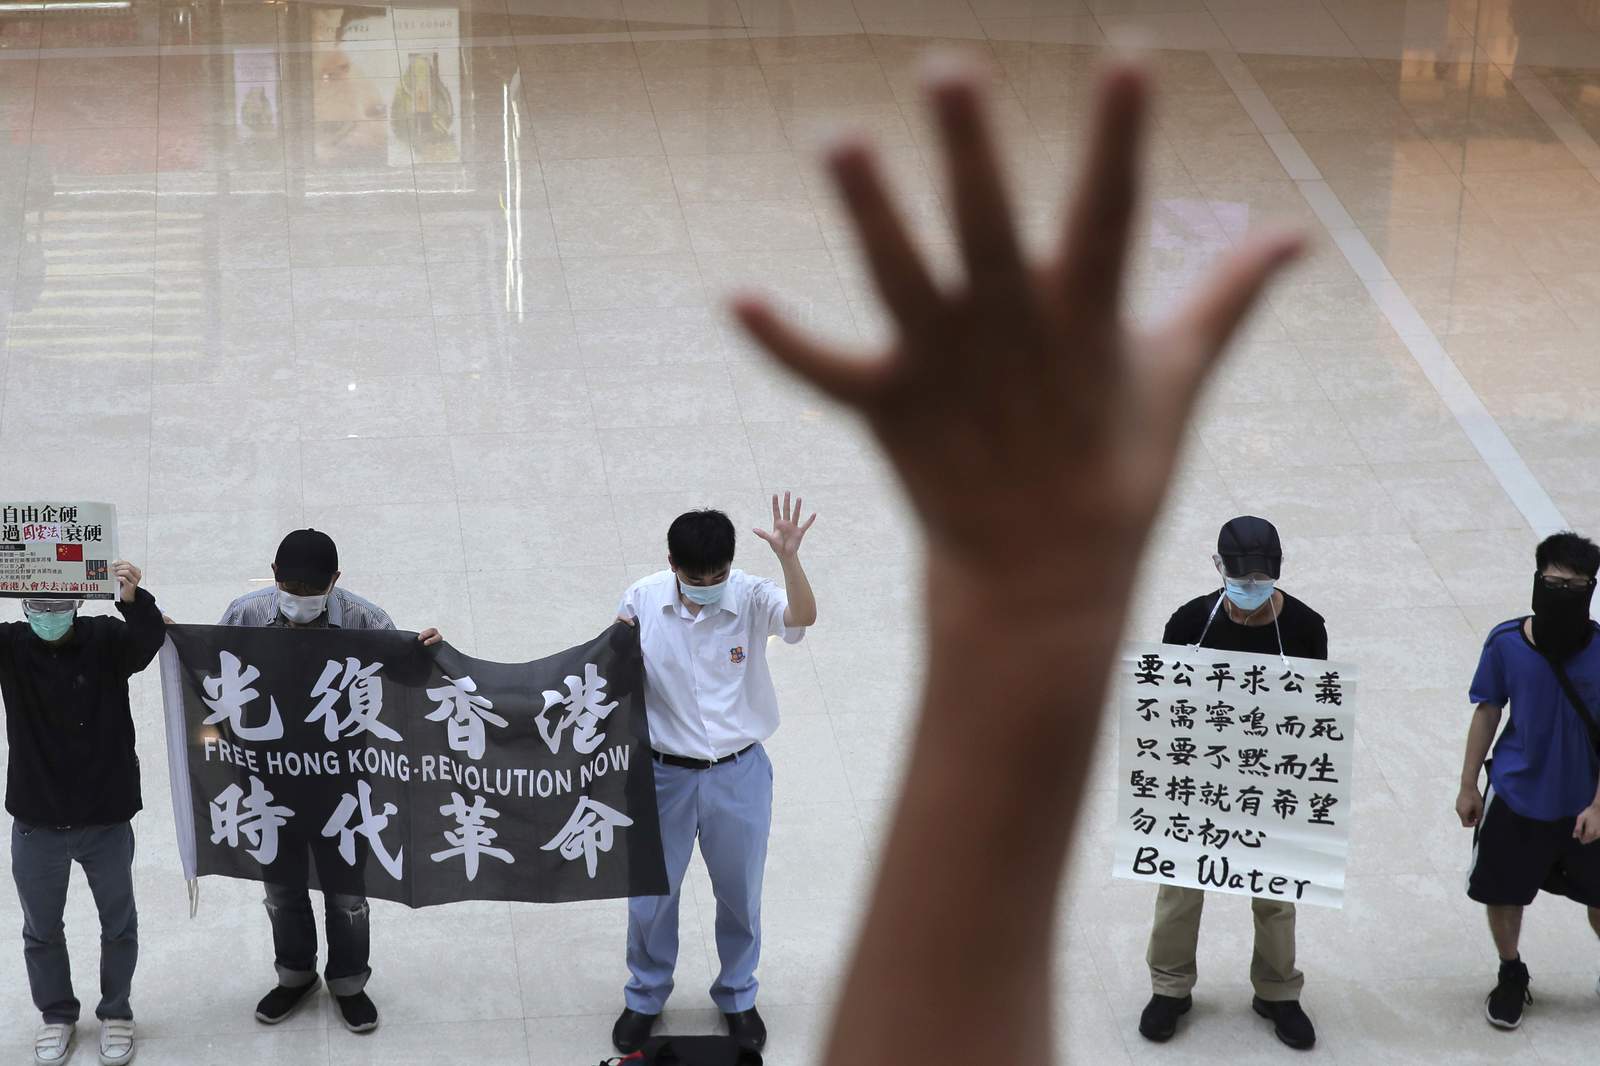 Protest in Hong Kong over China move to pass security law